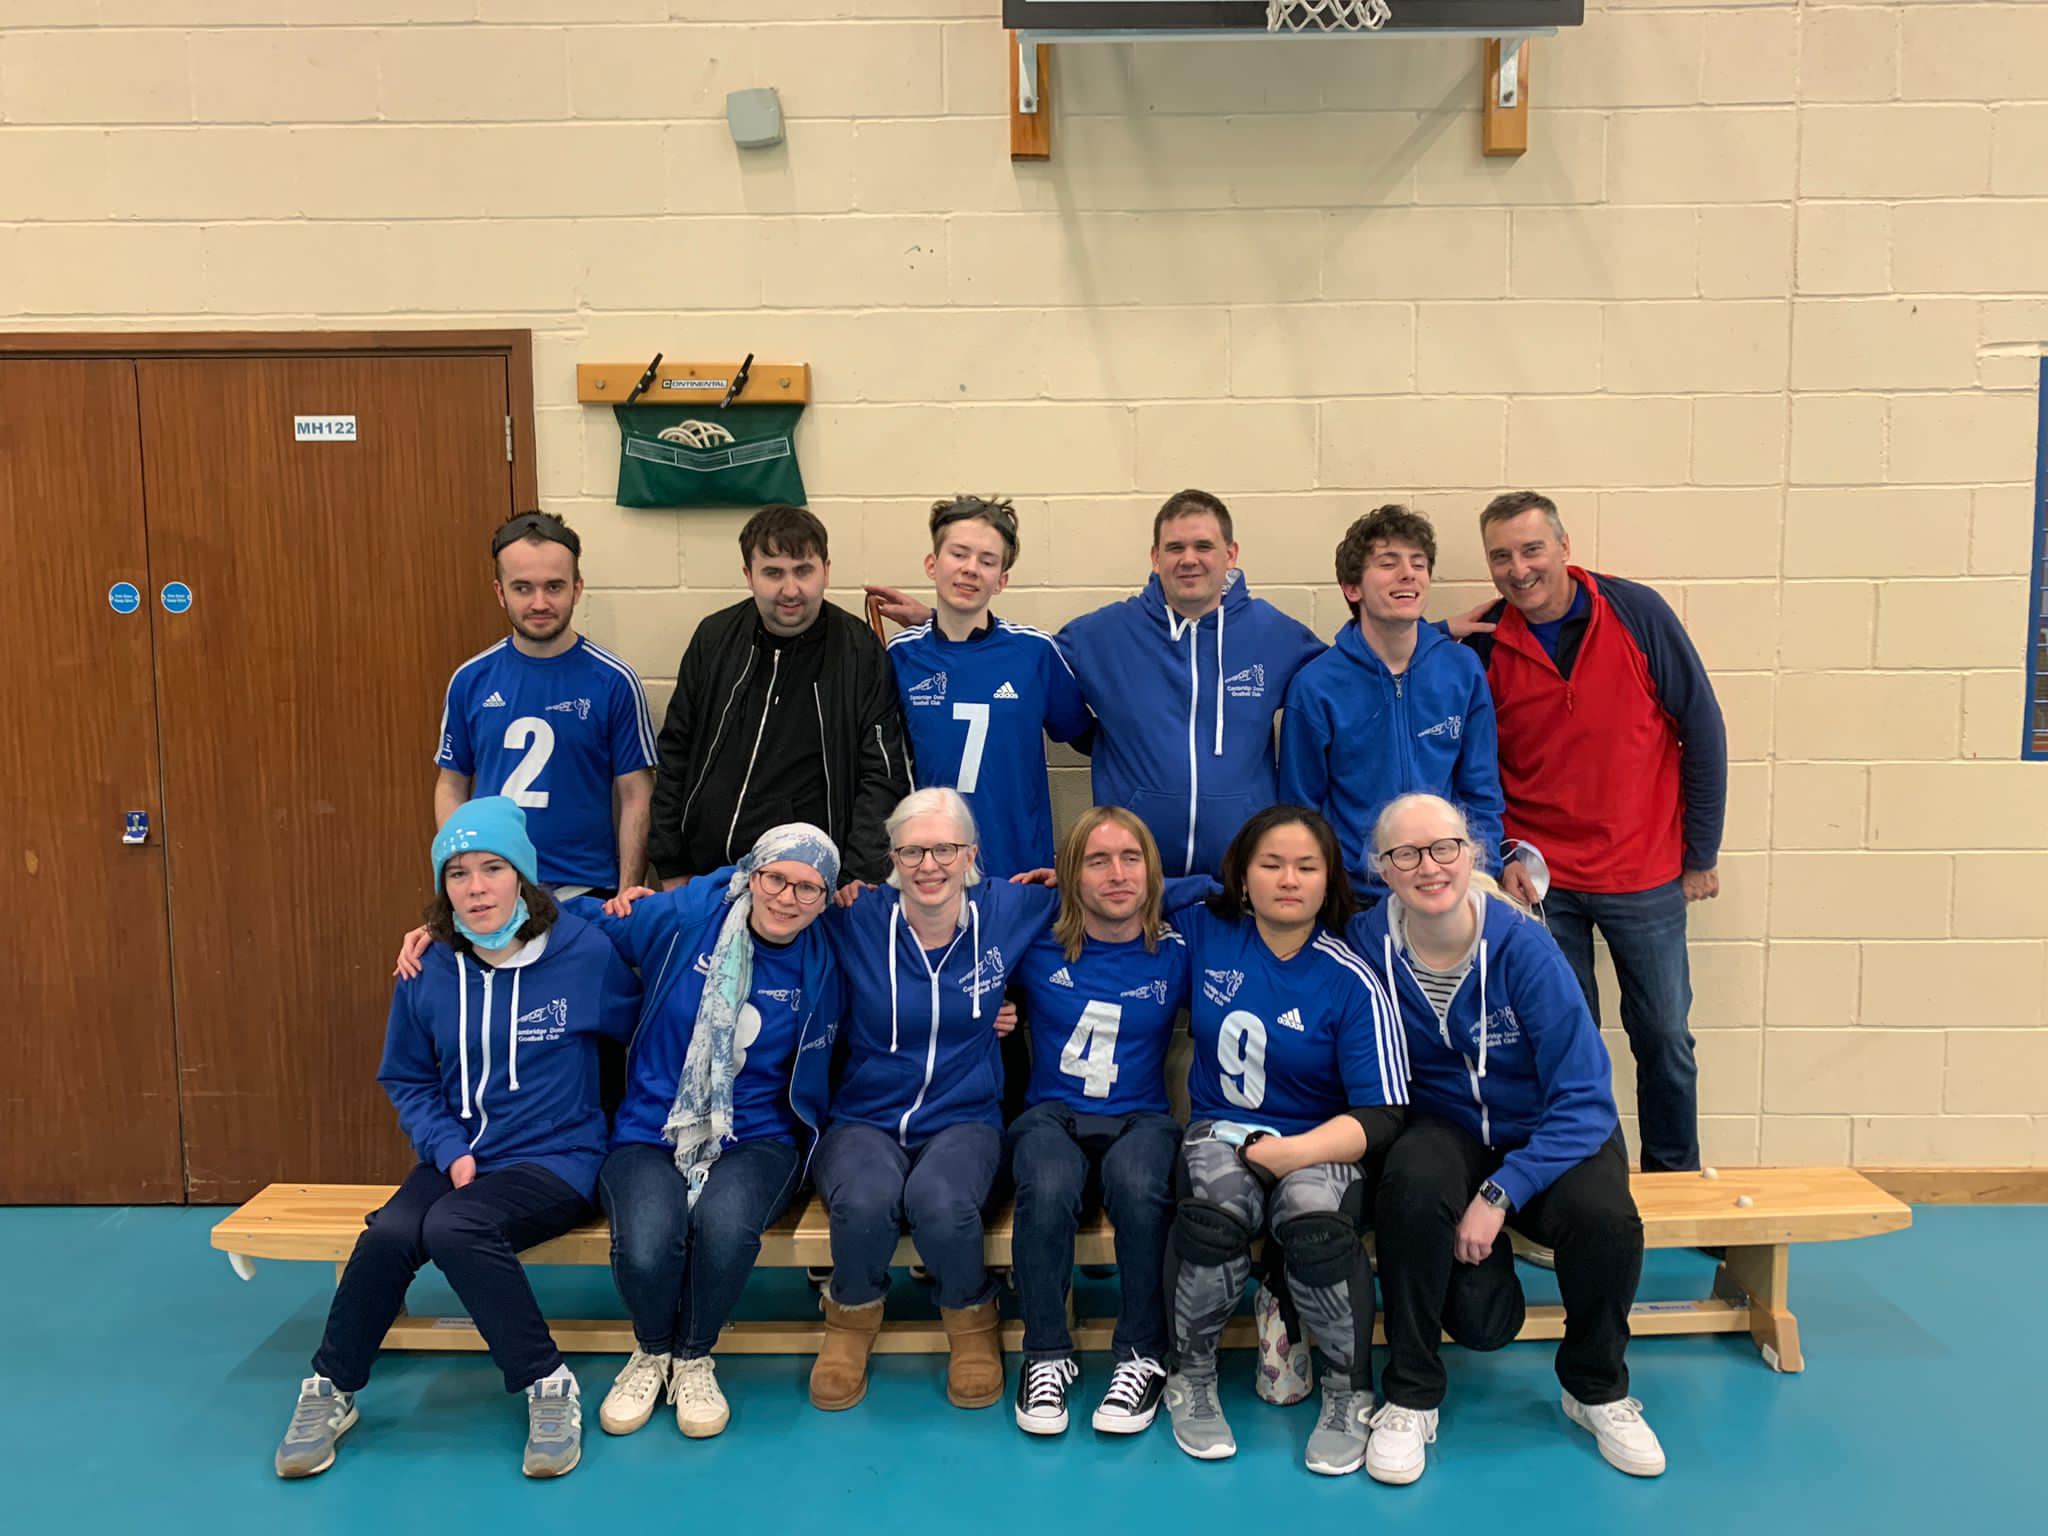 Two rows of six people in blue tracksuit tops posing for a photo